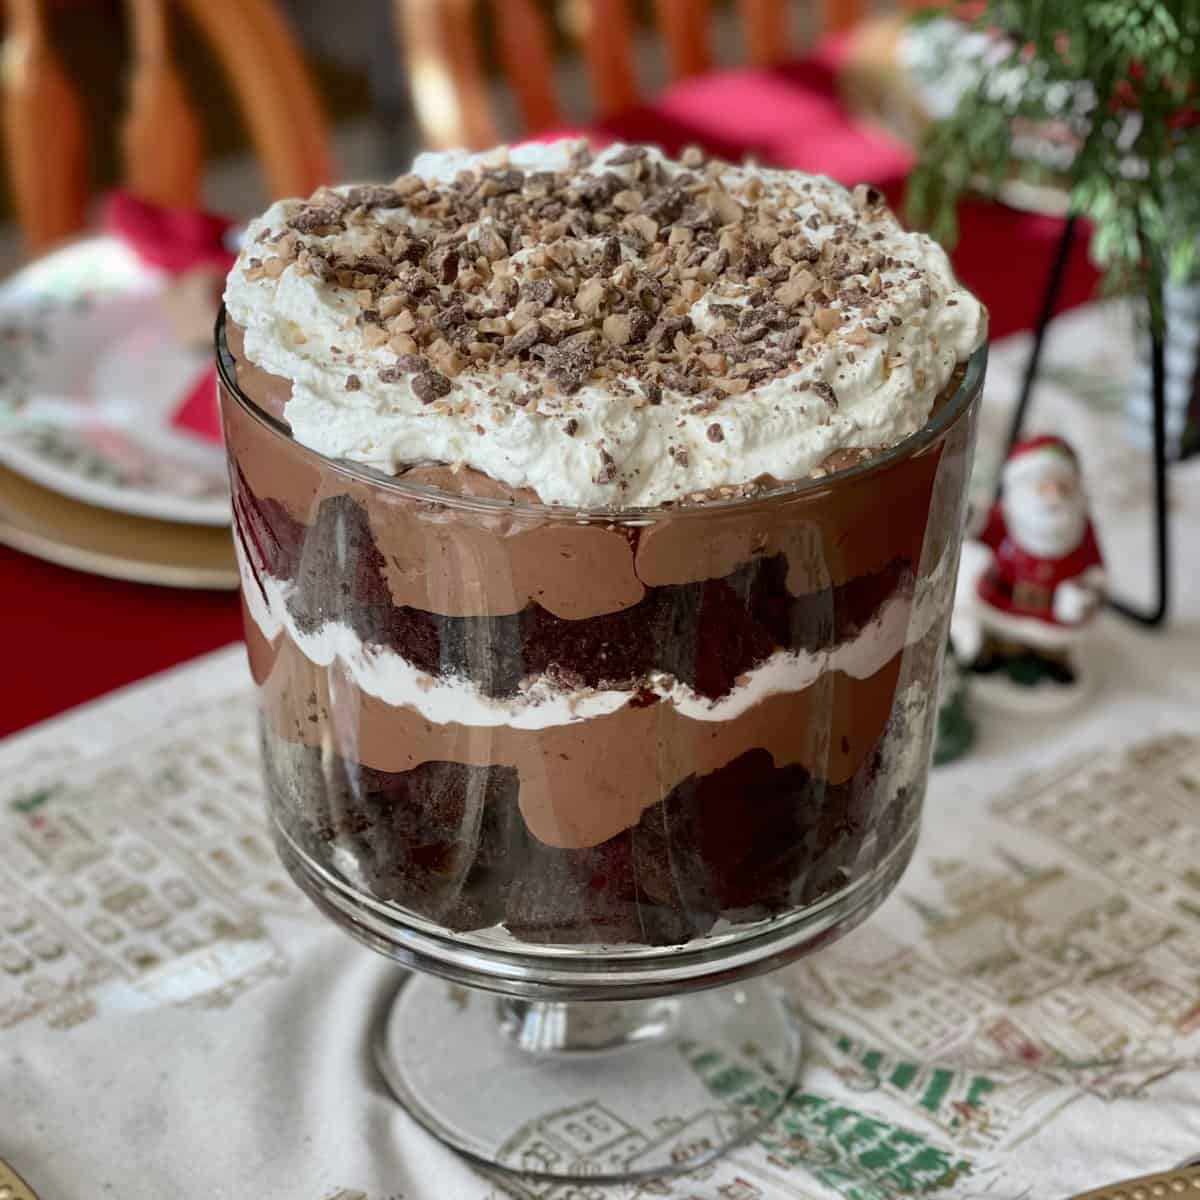 This is an image of a chocolate trifle in a glass trifle dish.